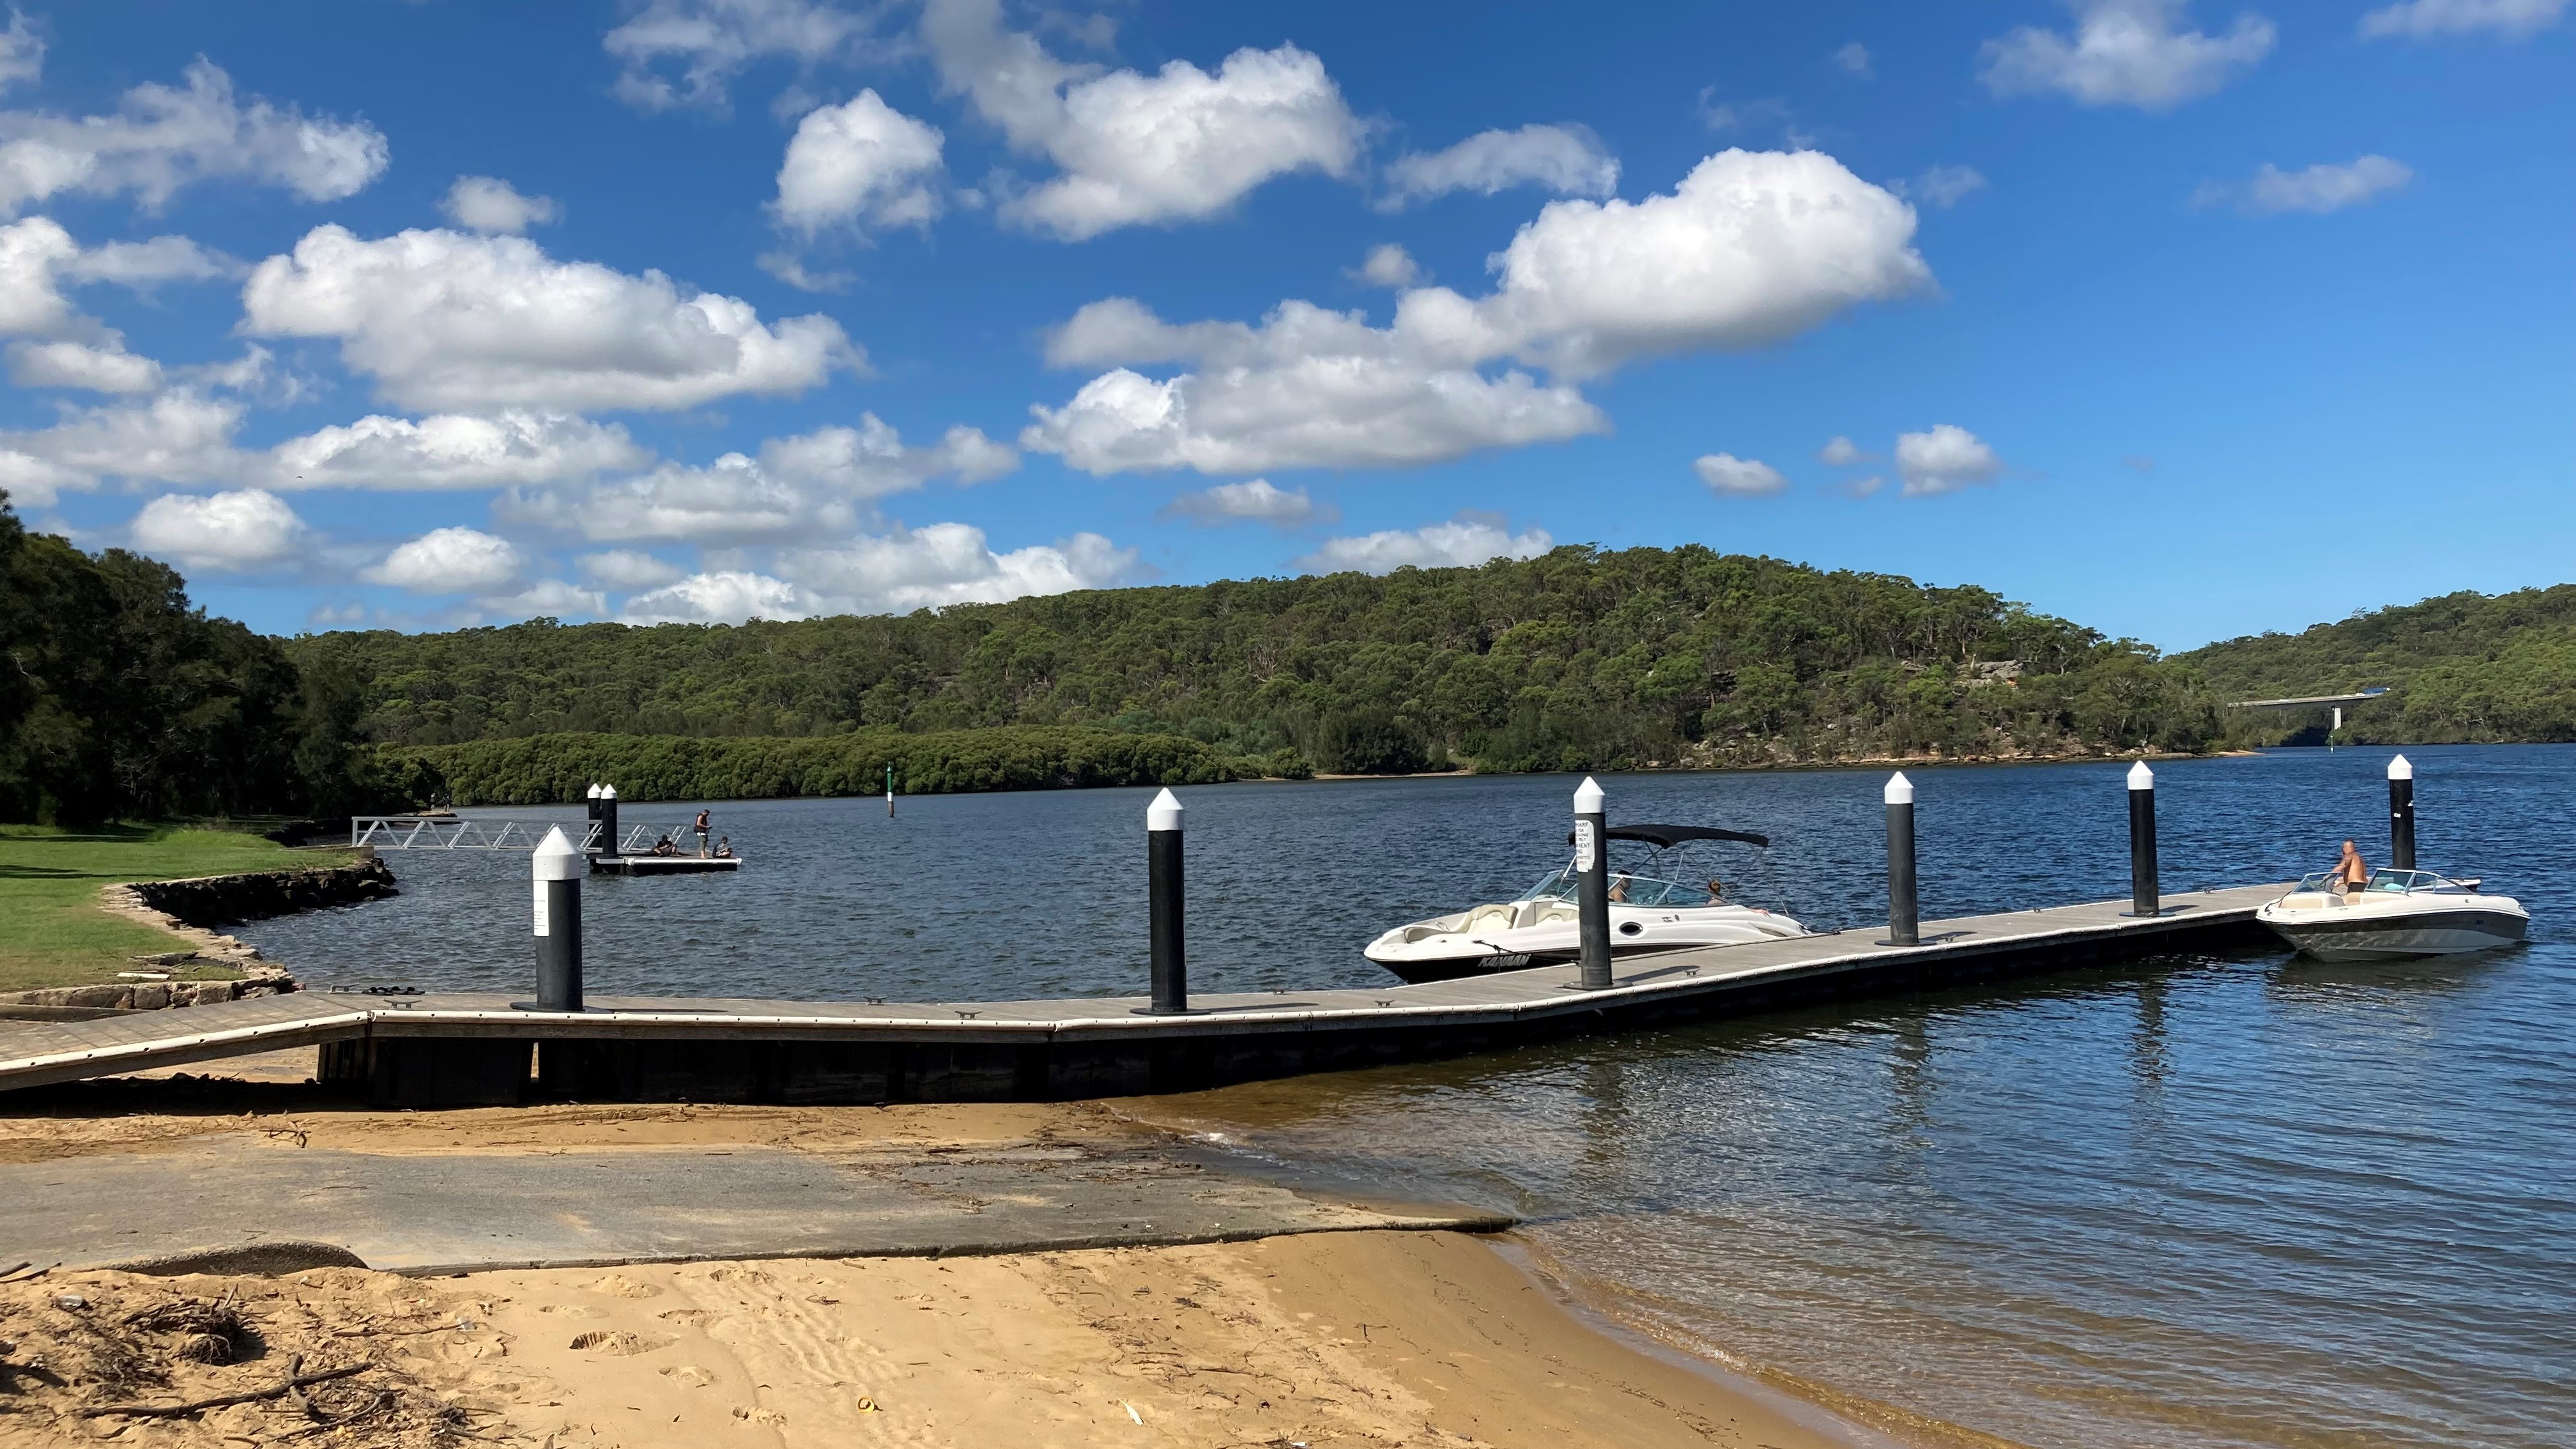 Boat ramp and jetty on a river with bushland and blue sky.